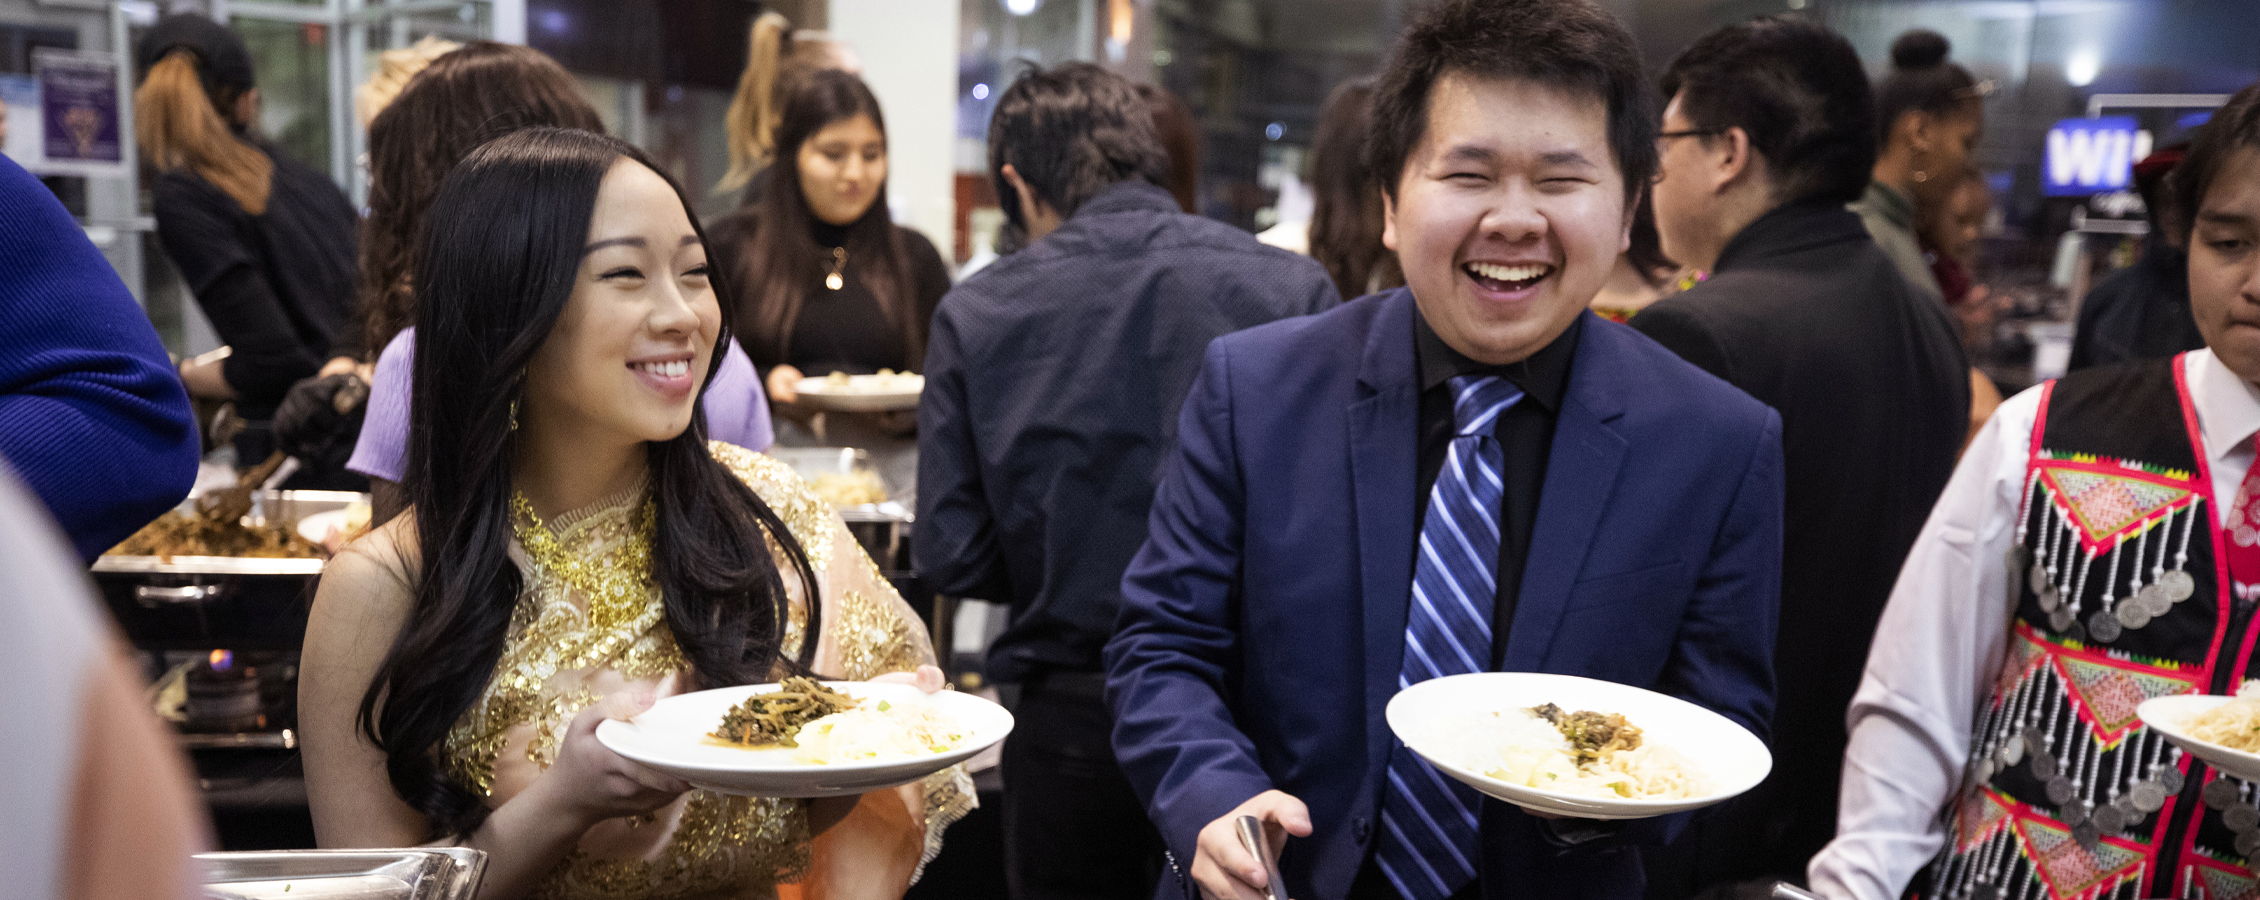 Two international students laugh together as they get food from a buffet.